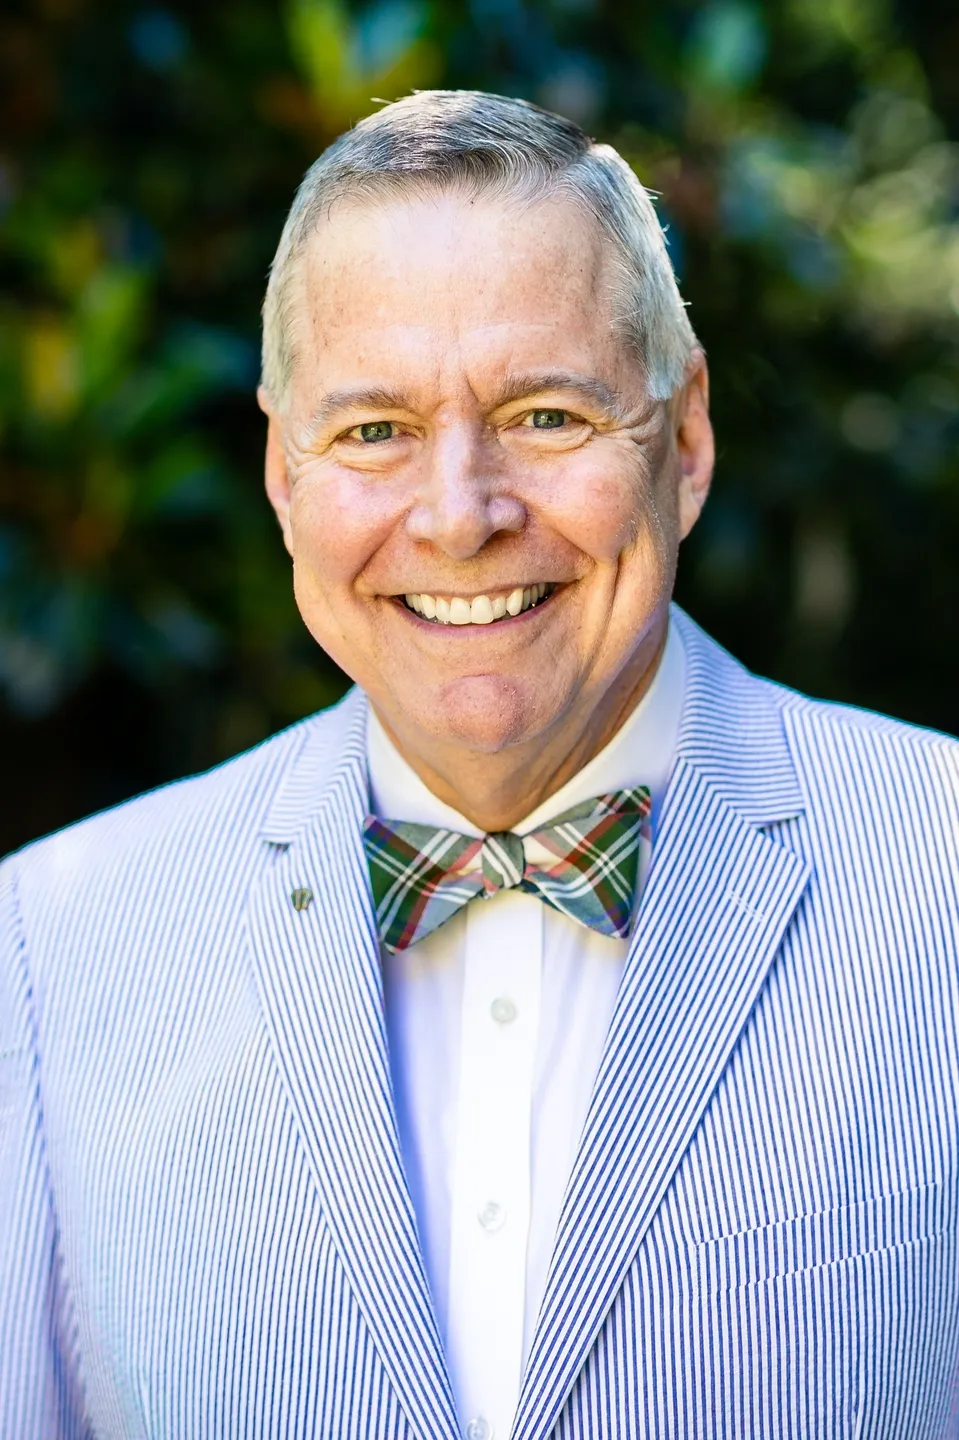 A man in a suit and bow tie smiling for the camera.